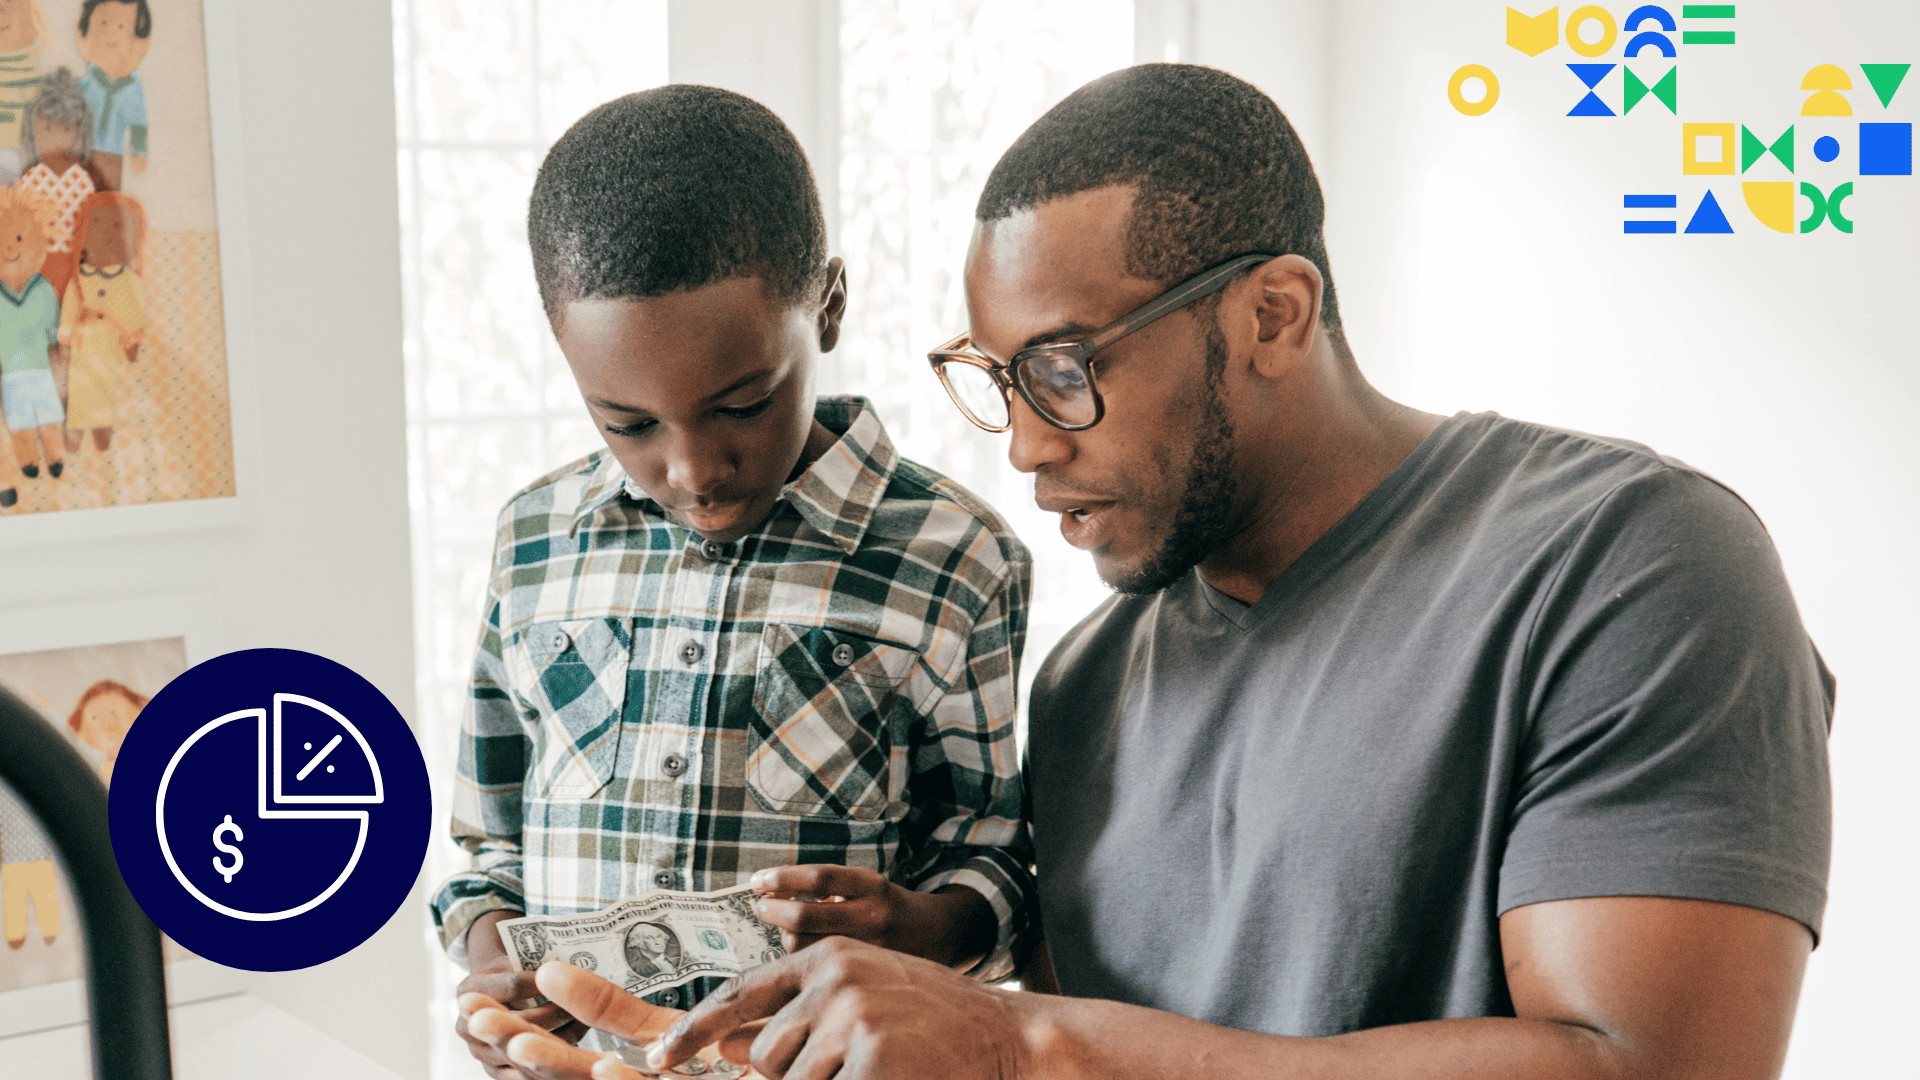 Image of a father and young son reviewing a dollar bill with a graphic icon of a pie chart representing loud budgeting